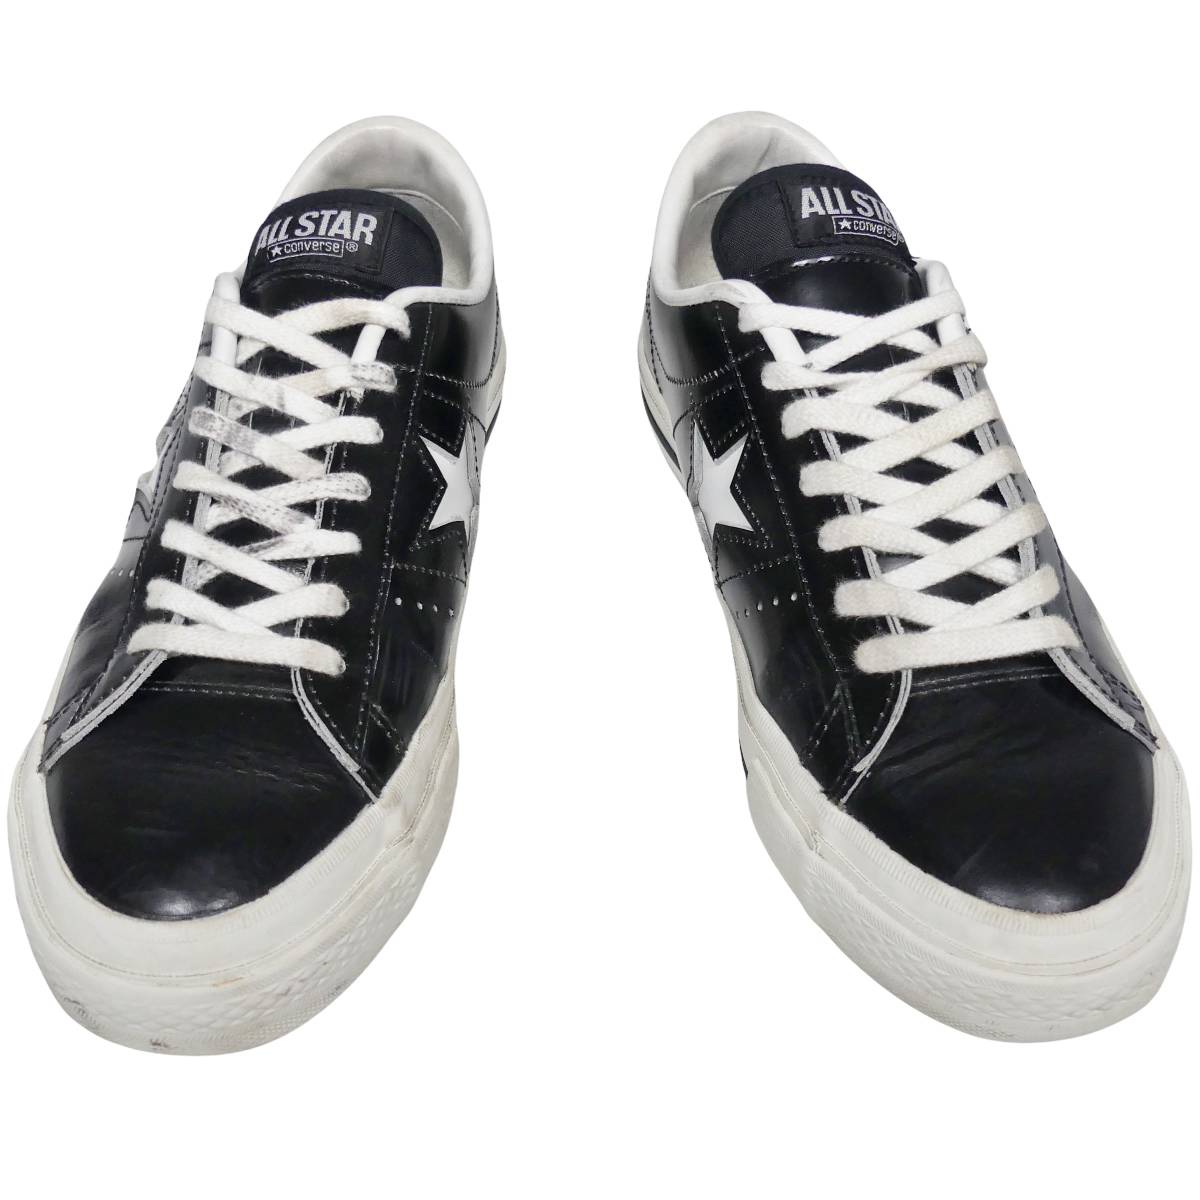  prompt decision * made in Japan CONVERSE*25cm one Star Converse men's 6.5 leather sneakers white black original leather all Star real leather allstar records out of production 